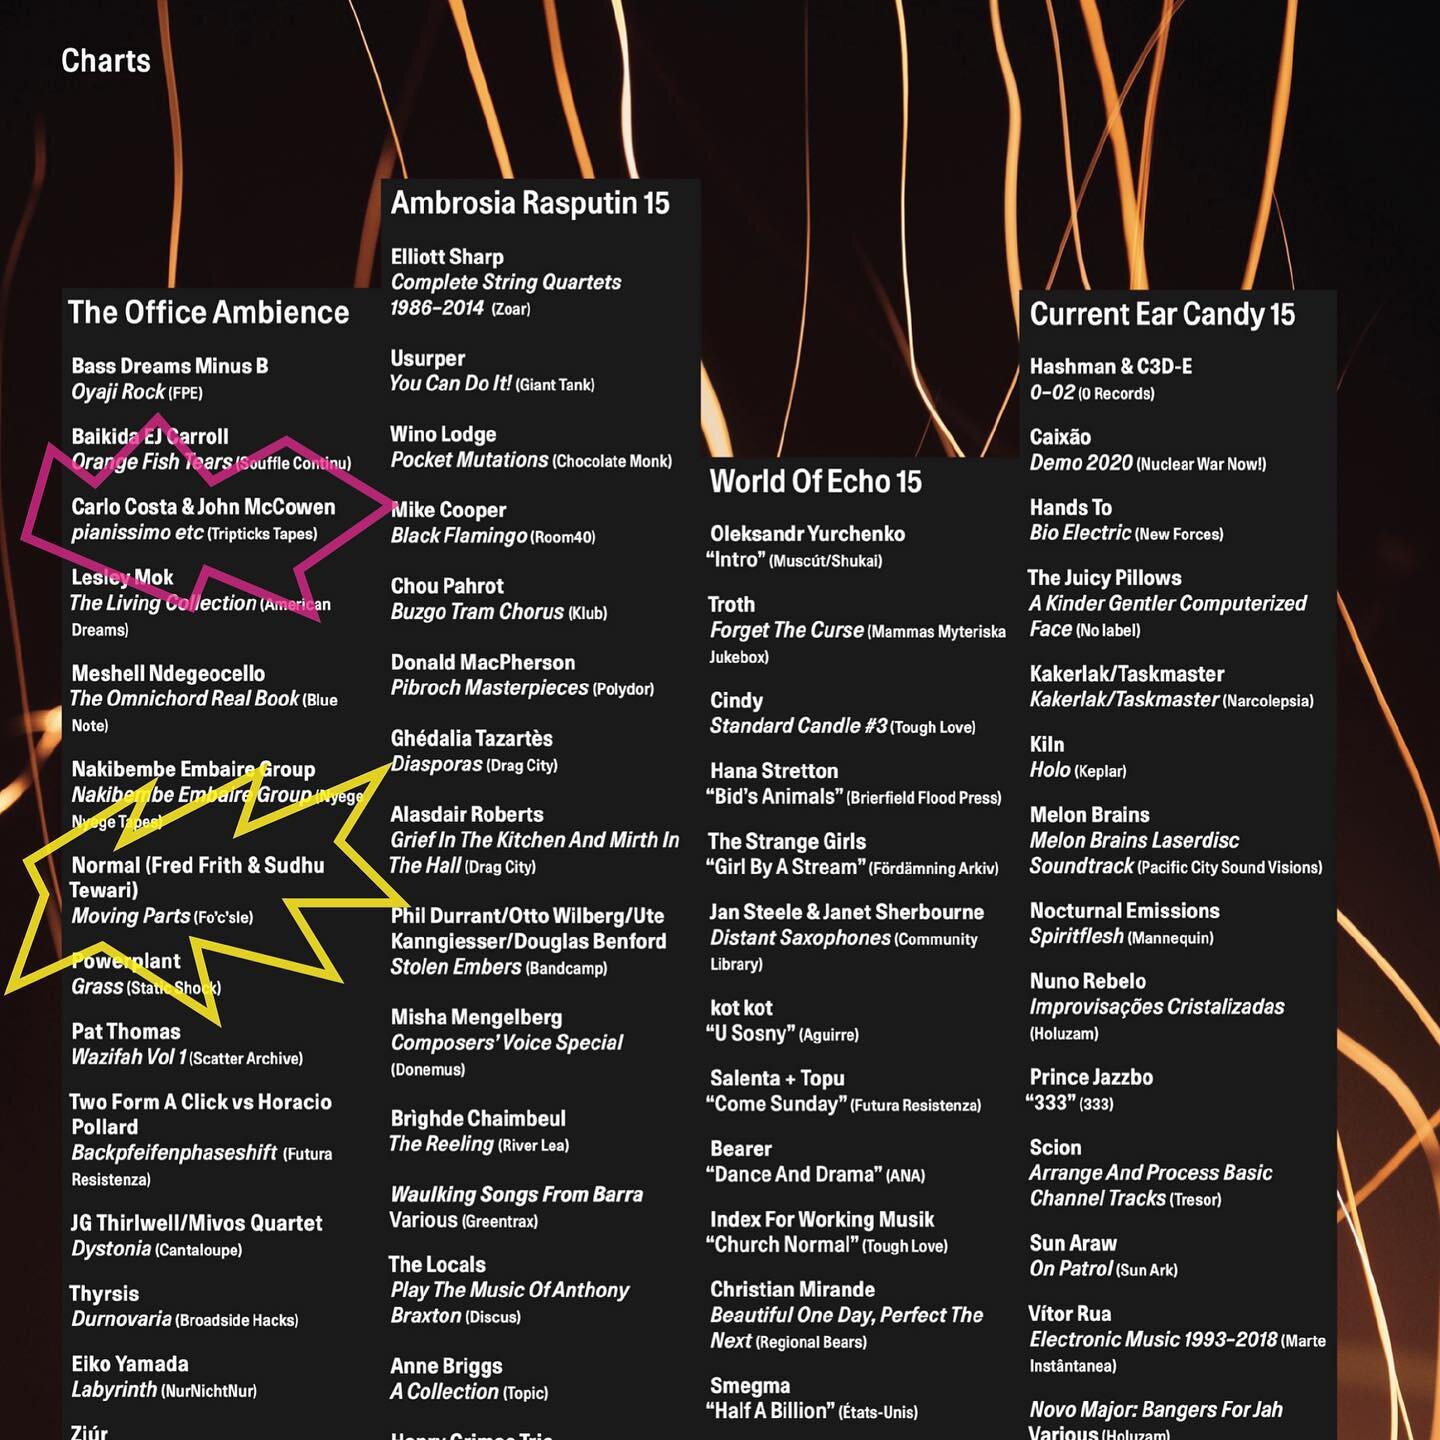 Huge thanks to @thewiremagazine for including &ldquo;Moving Parts&rdquo; by @ffr1th and @sudhutewari in the August issue&rsquo;s Office Ambience playlist! Take a listen to the mix online, which also includes a fantastic track by fo&rsquo;c&rsquo;sle 